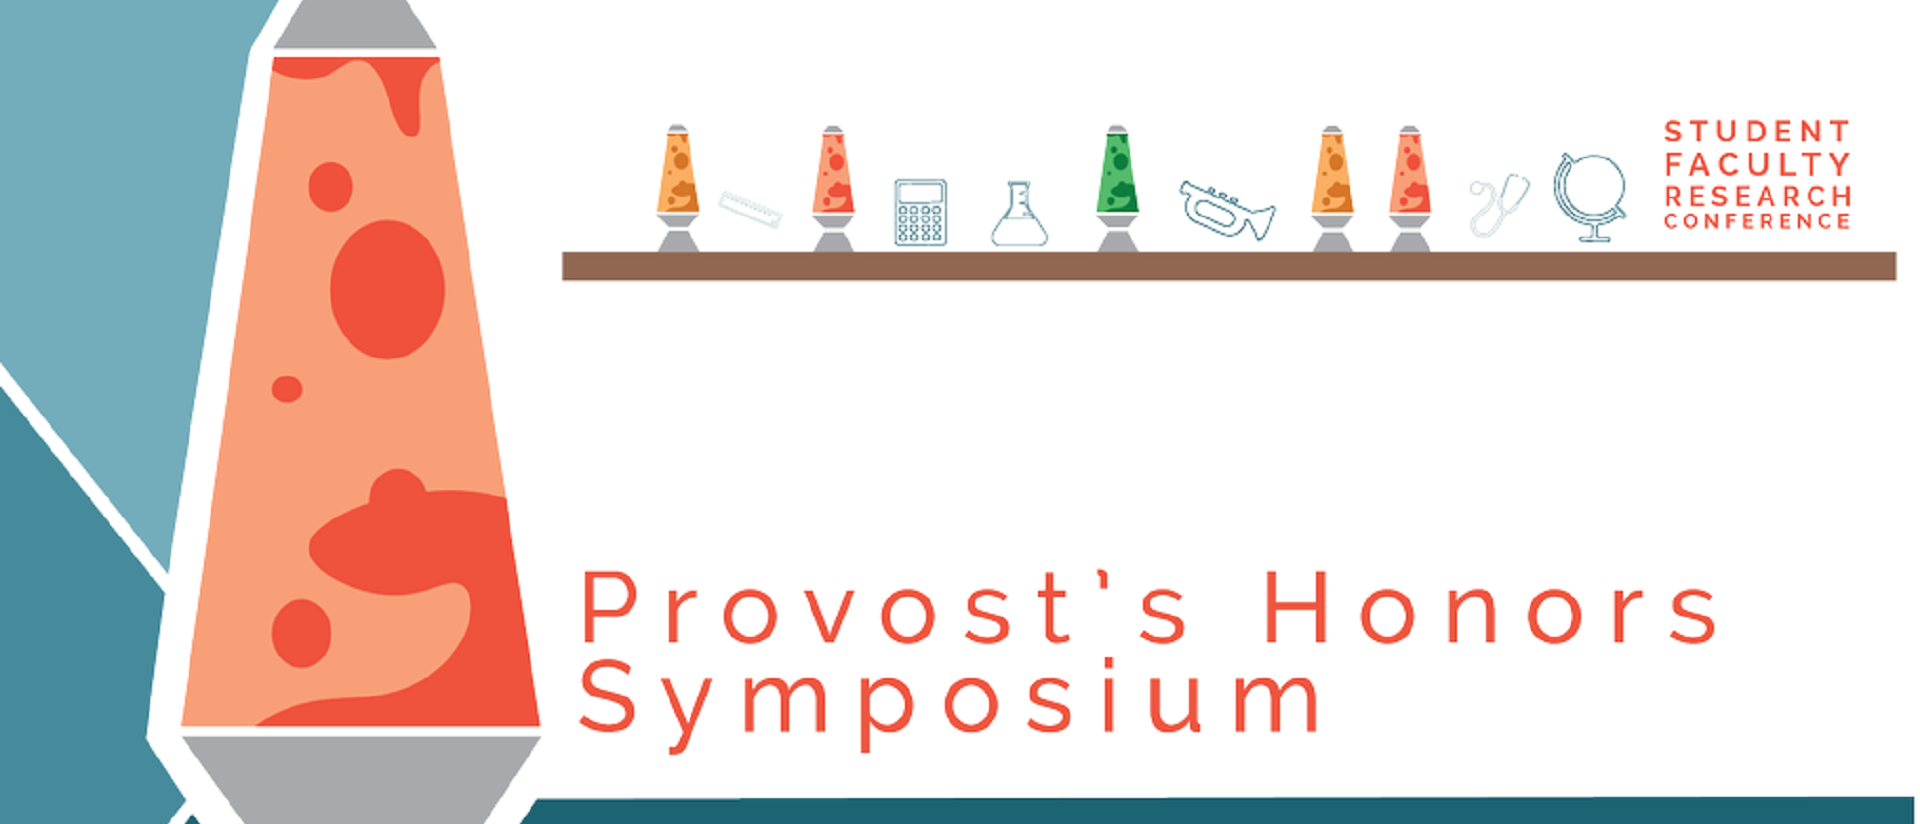 Provost's Honors Symposium